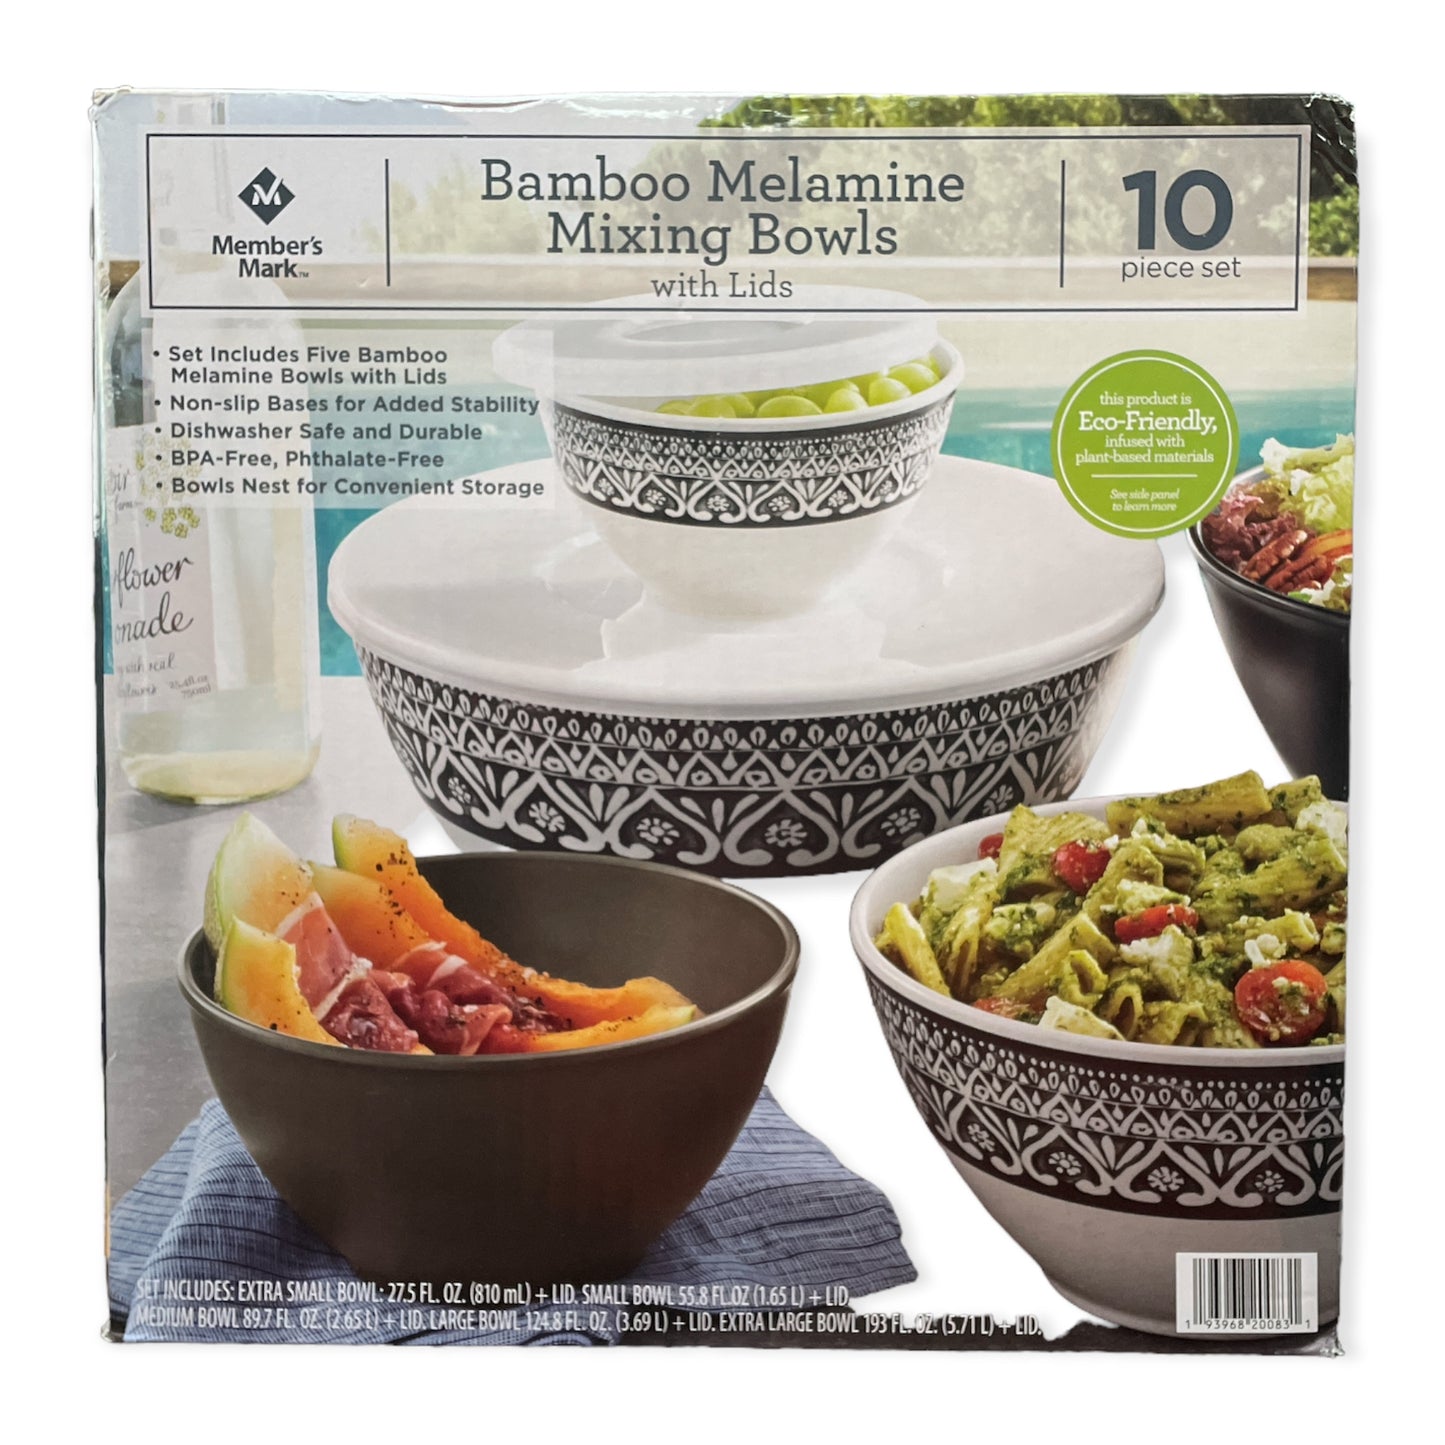 Member's Mark 10-Piece Melamine Mixing Bowls with Lids, Marakech